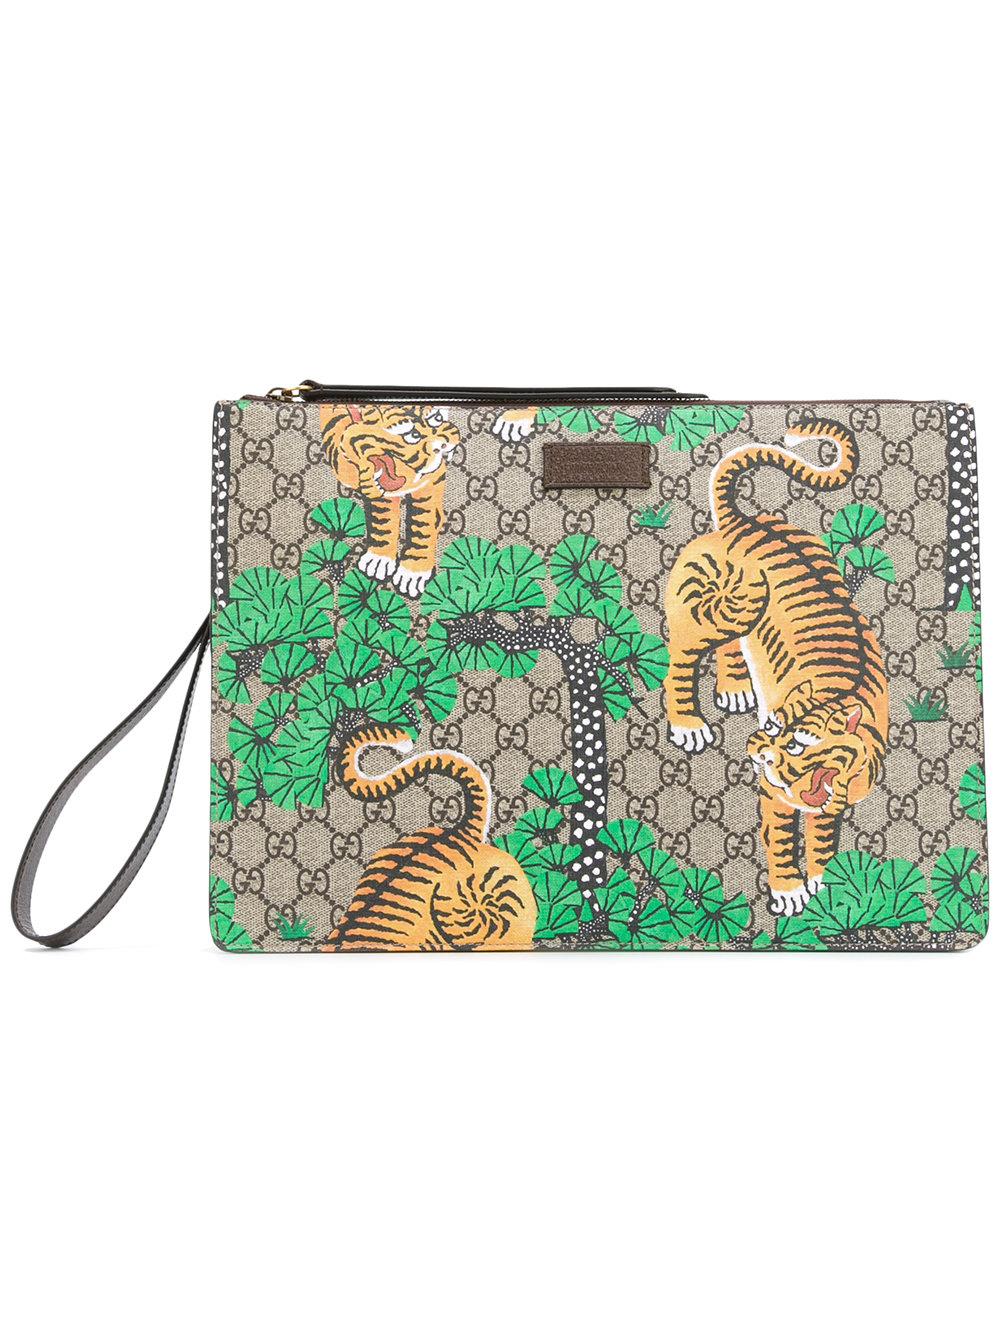 Gucci Leather Bengal Tiger Print Pouch in Green for Men - Lyst